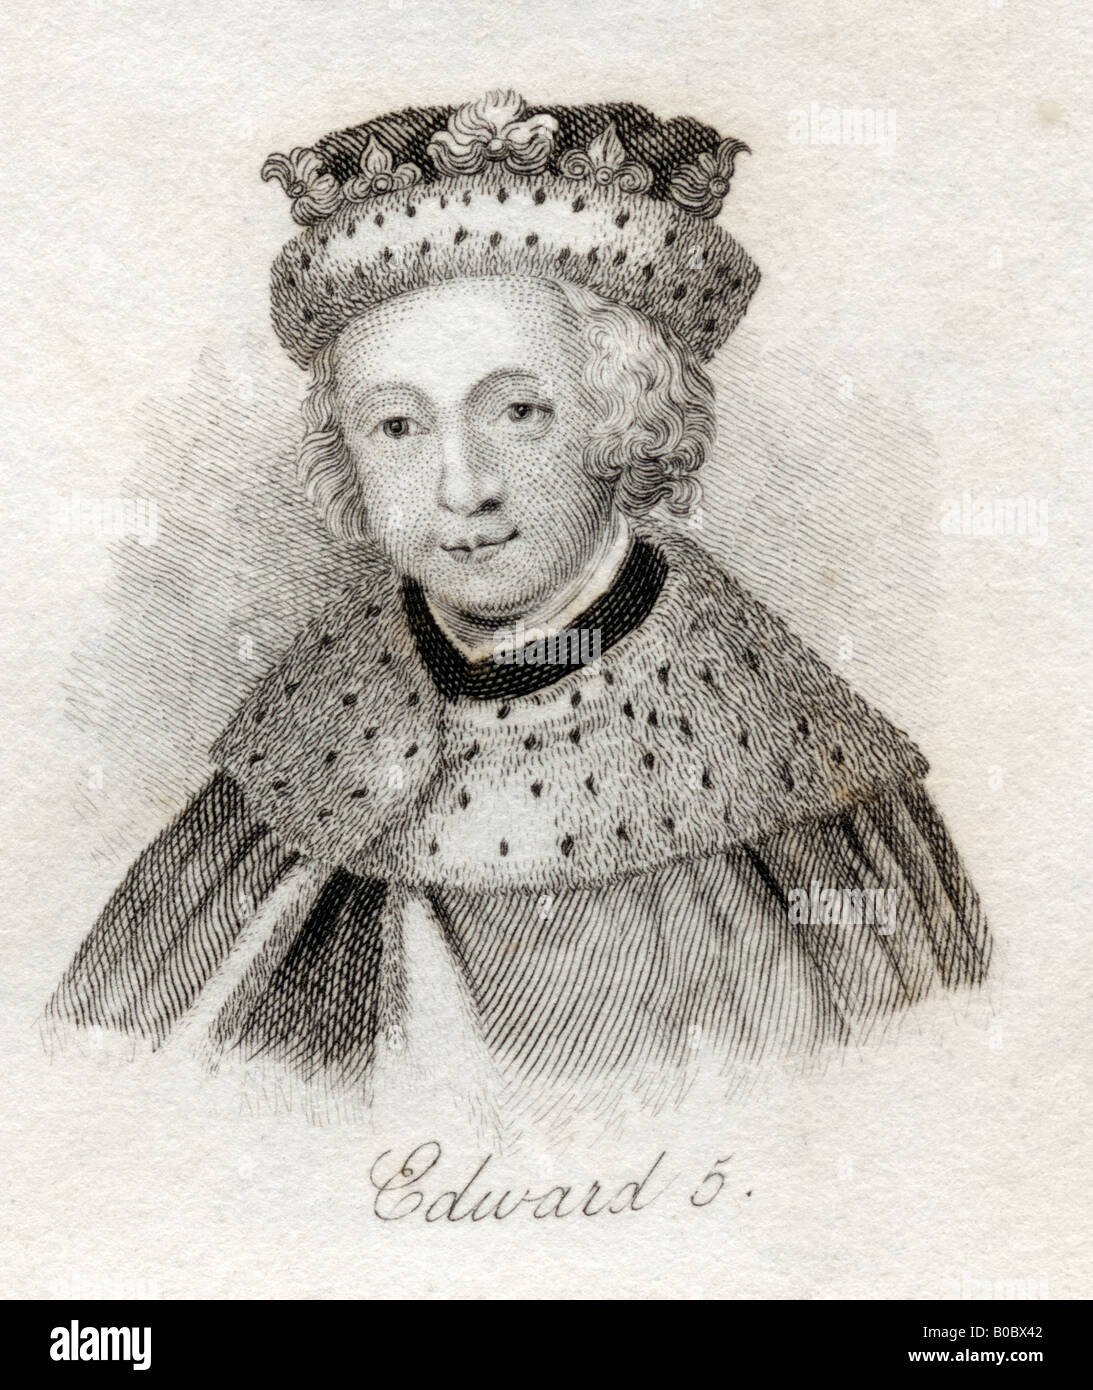 Edward V, 1470 - 1483. Short lived and uncrowned King of England. From the book Crabbs Historical Dictionary, published 1825. Stock Photo